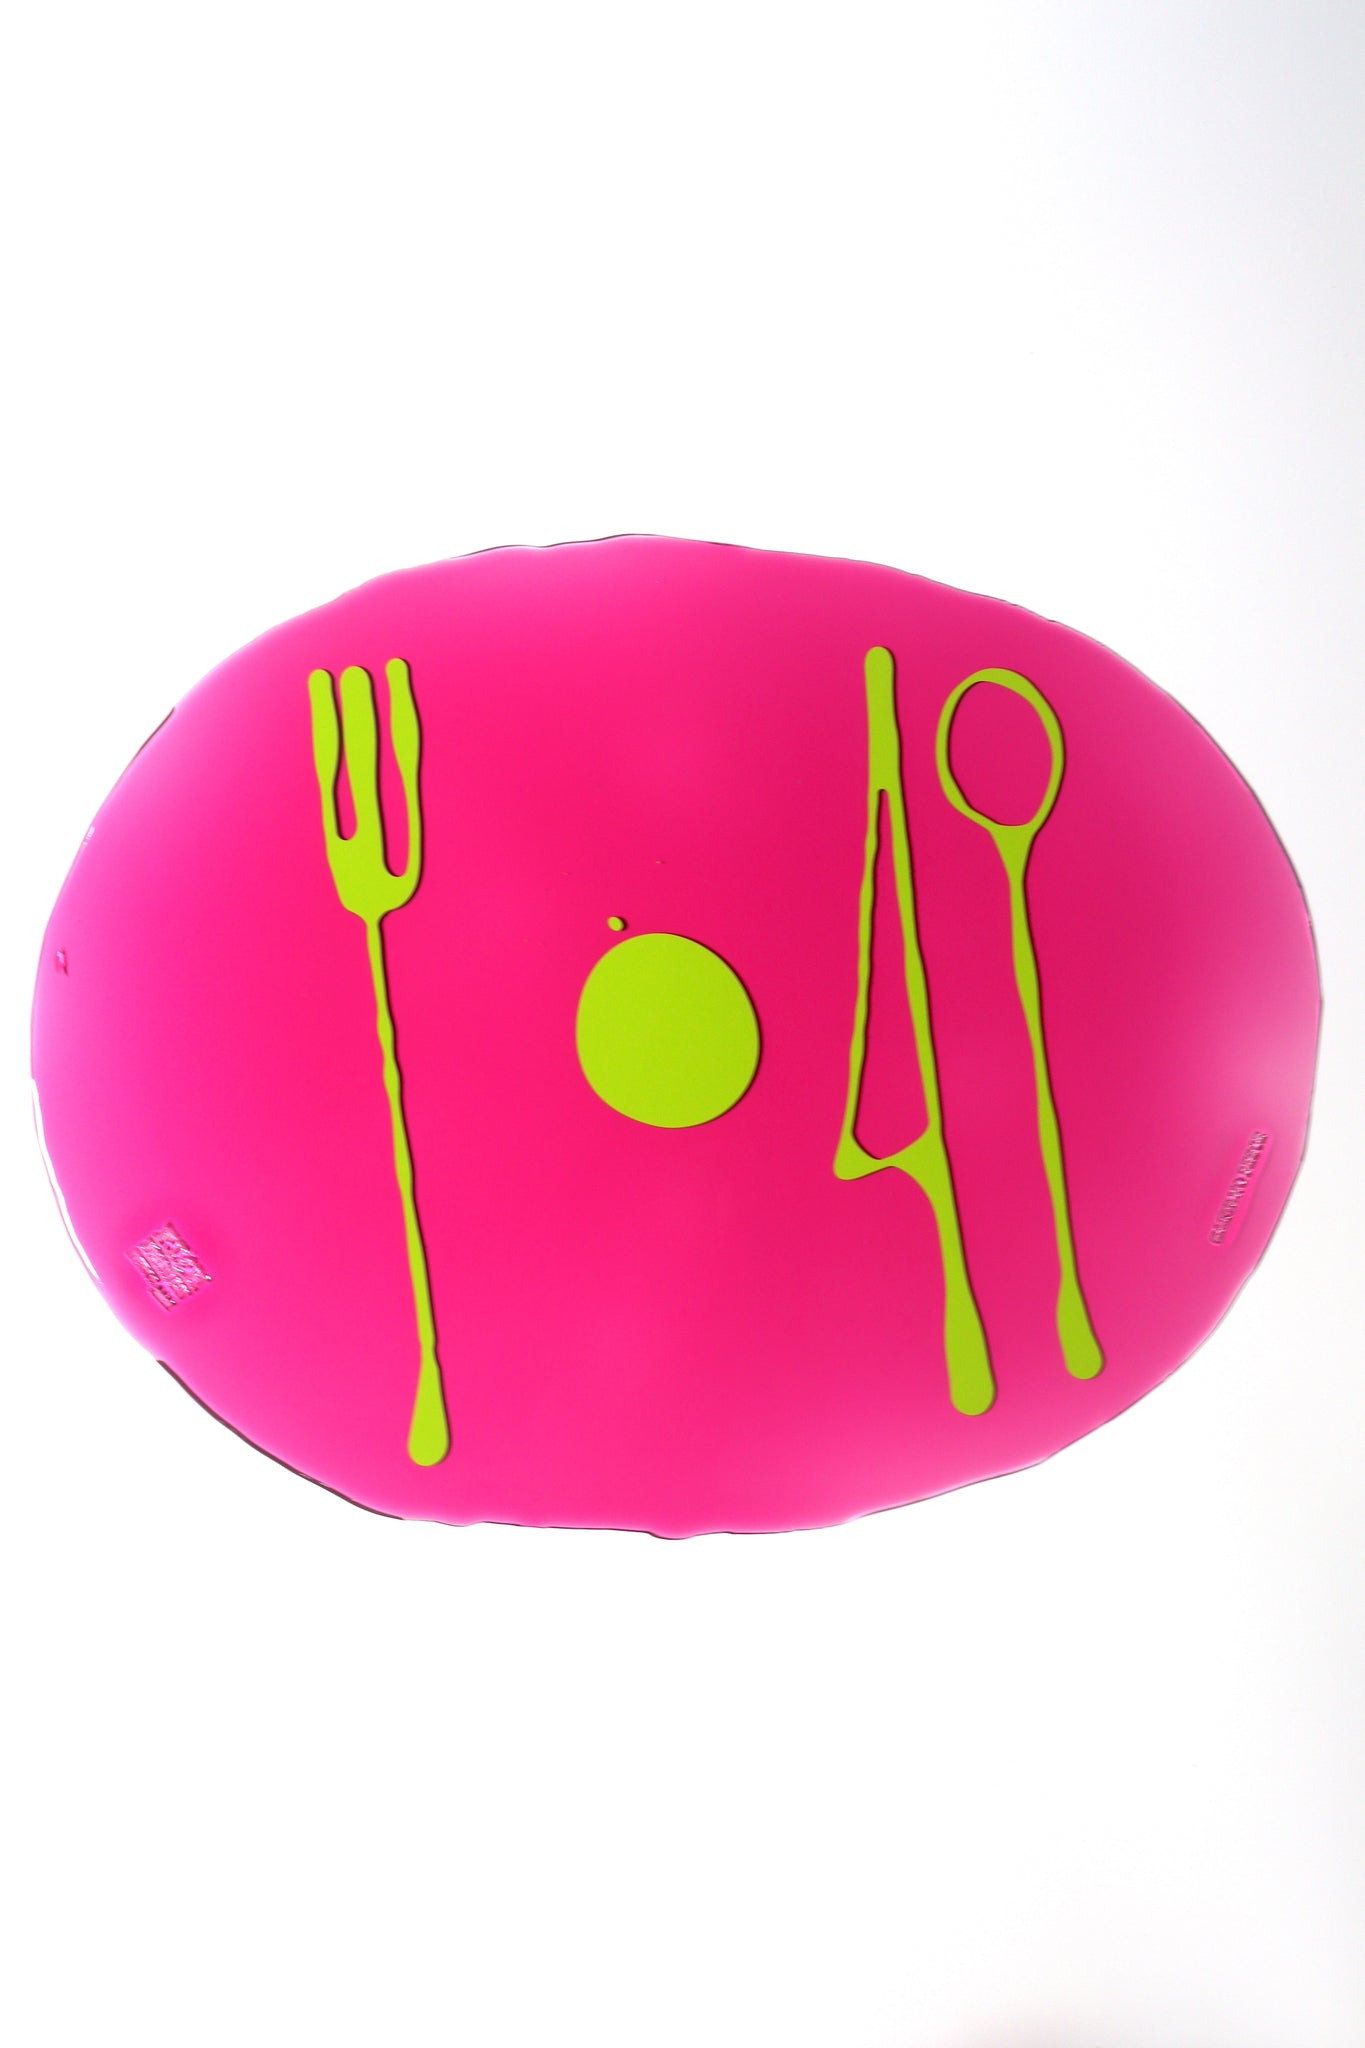 Placemat by Gaetano Pesce